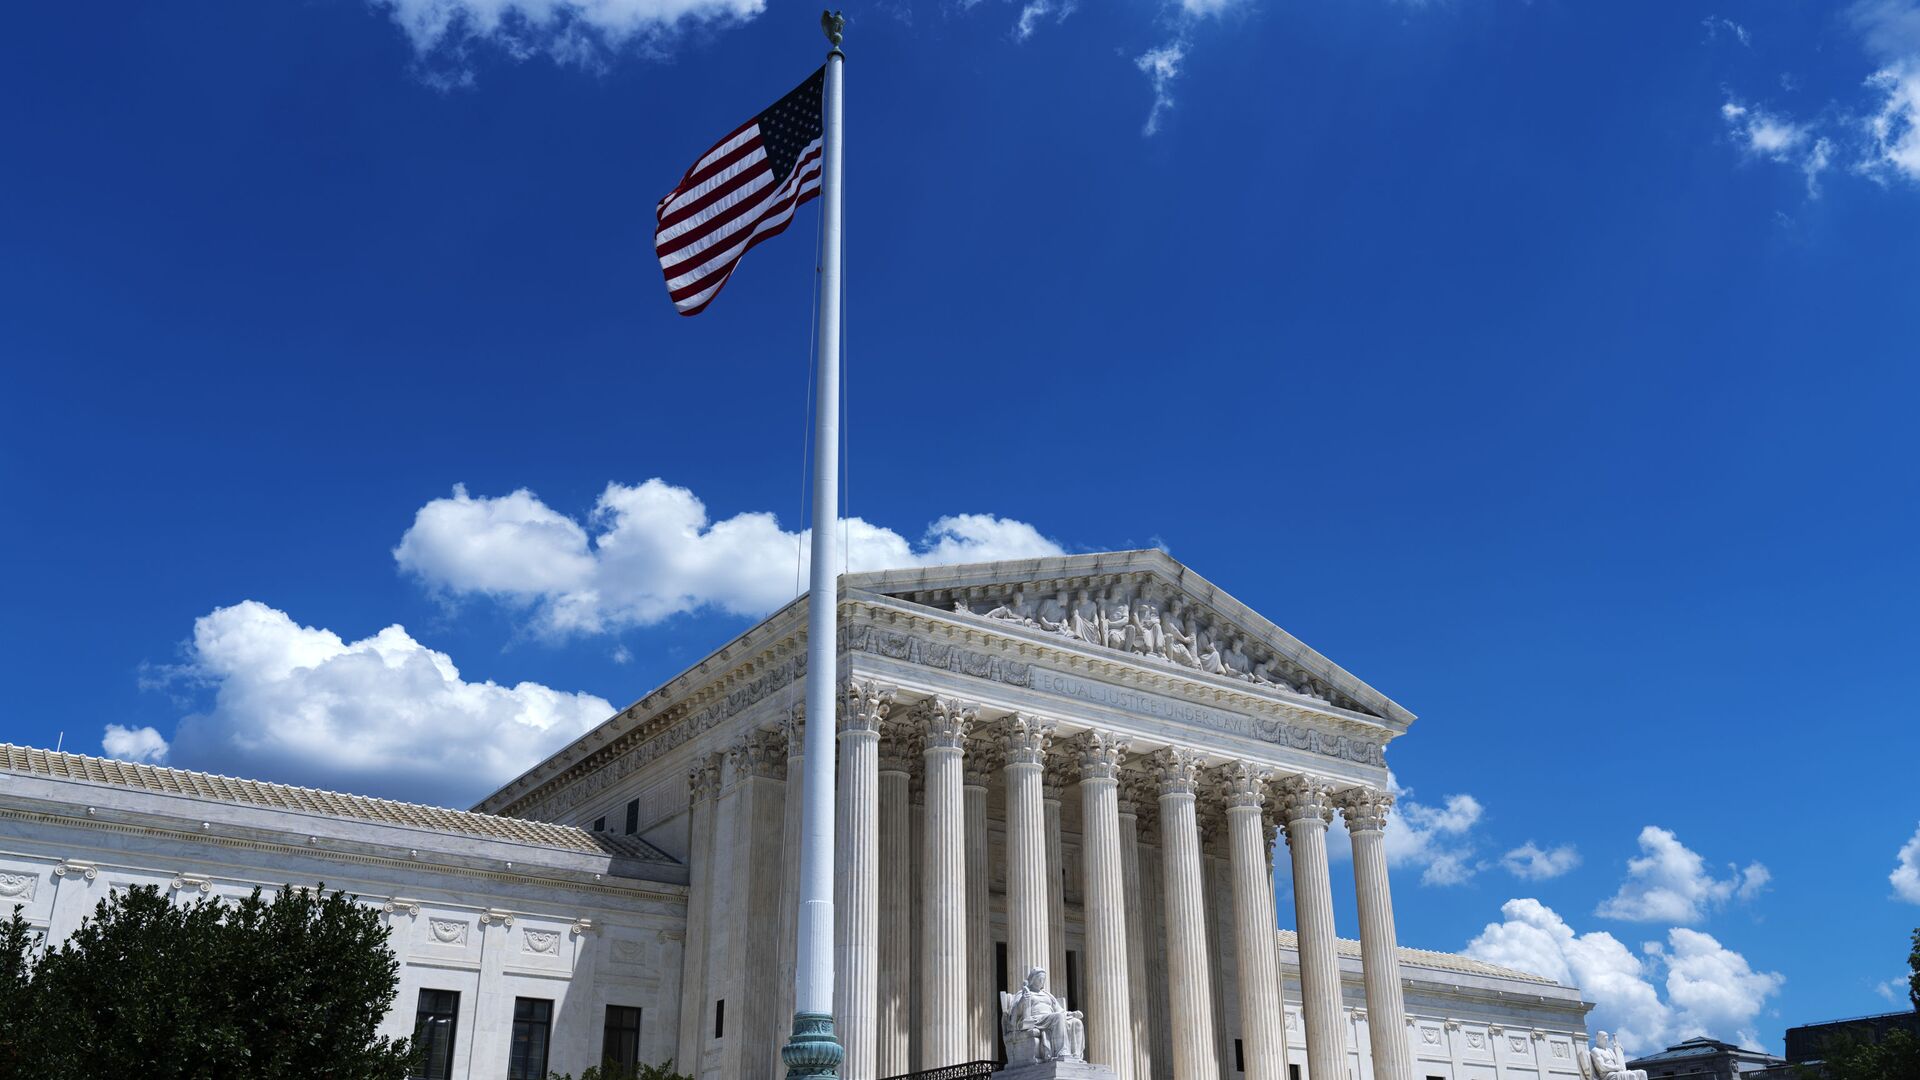 The US Supreme Court is seen on Capitol Hill in Washington, Wednesday, June 30, 2021 - Sputnik International, 1920, 15.10.2021